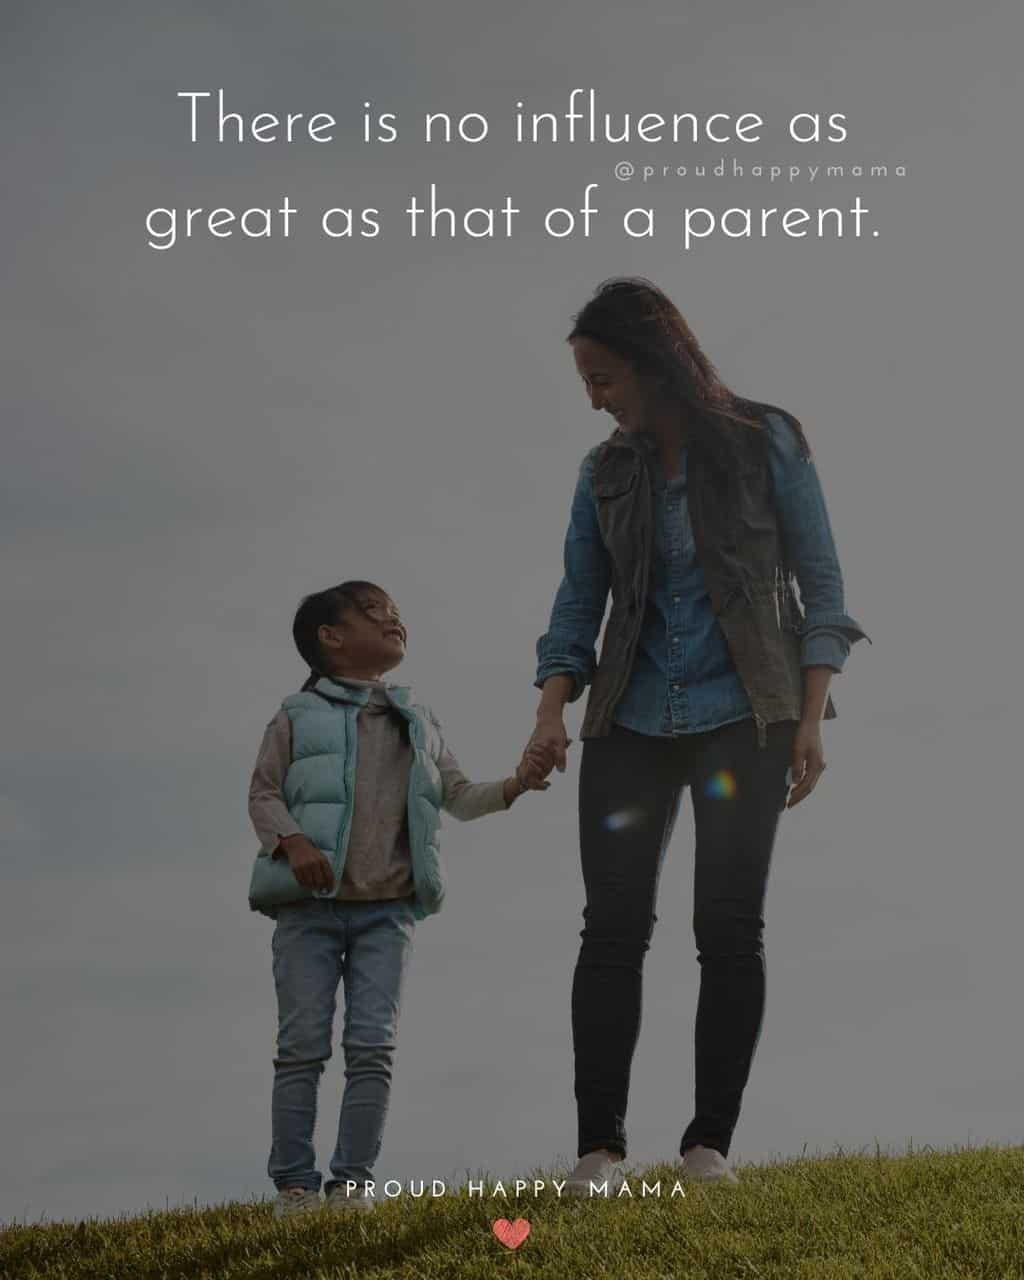 Parenting Quotes - There is no influence as great as that of a parent.’